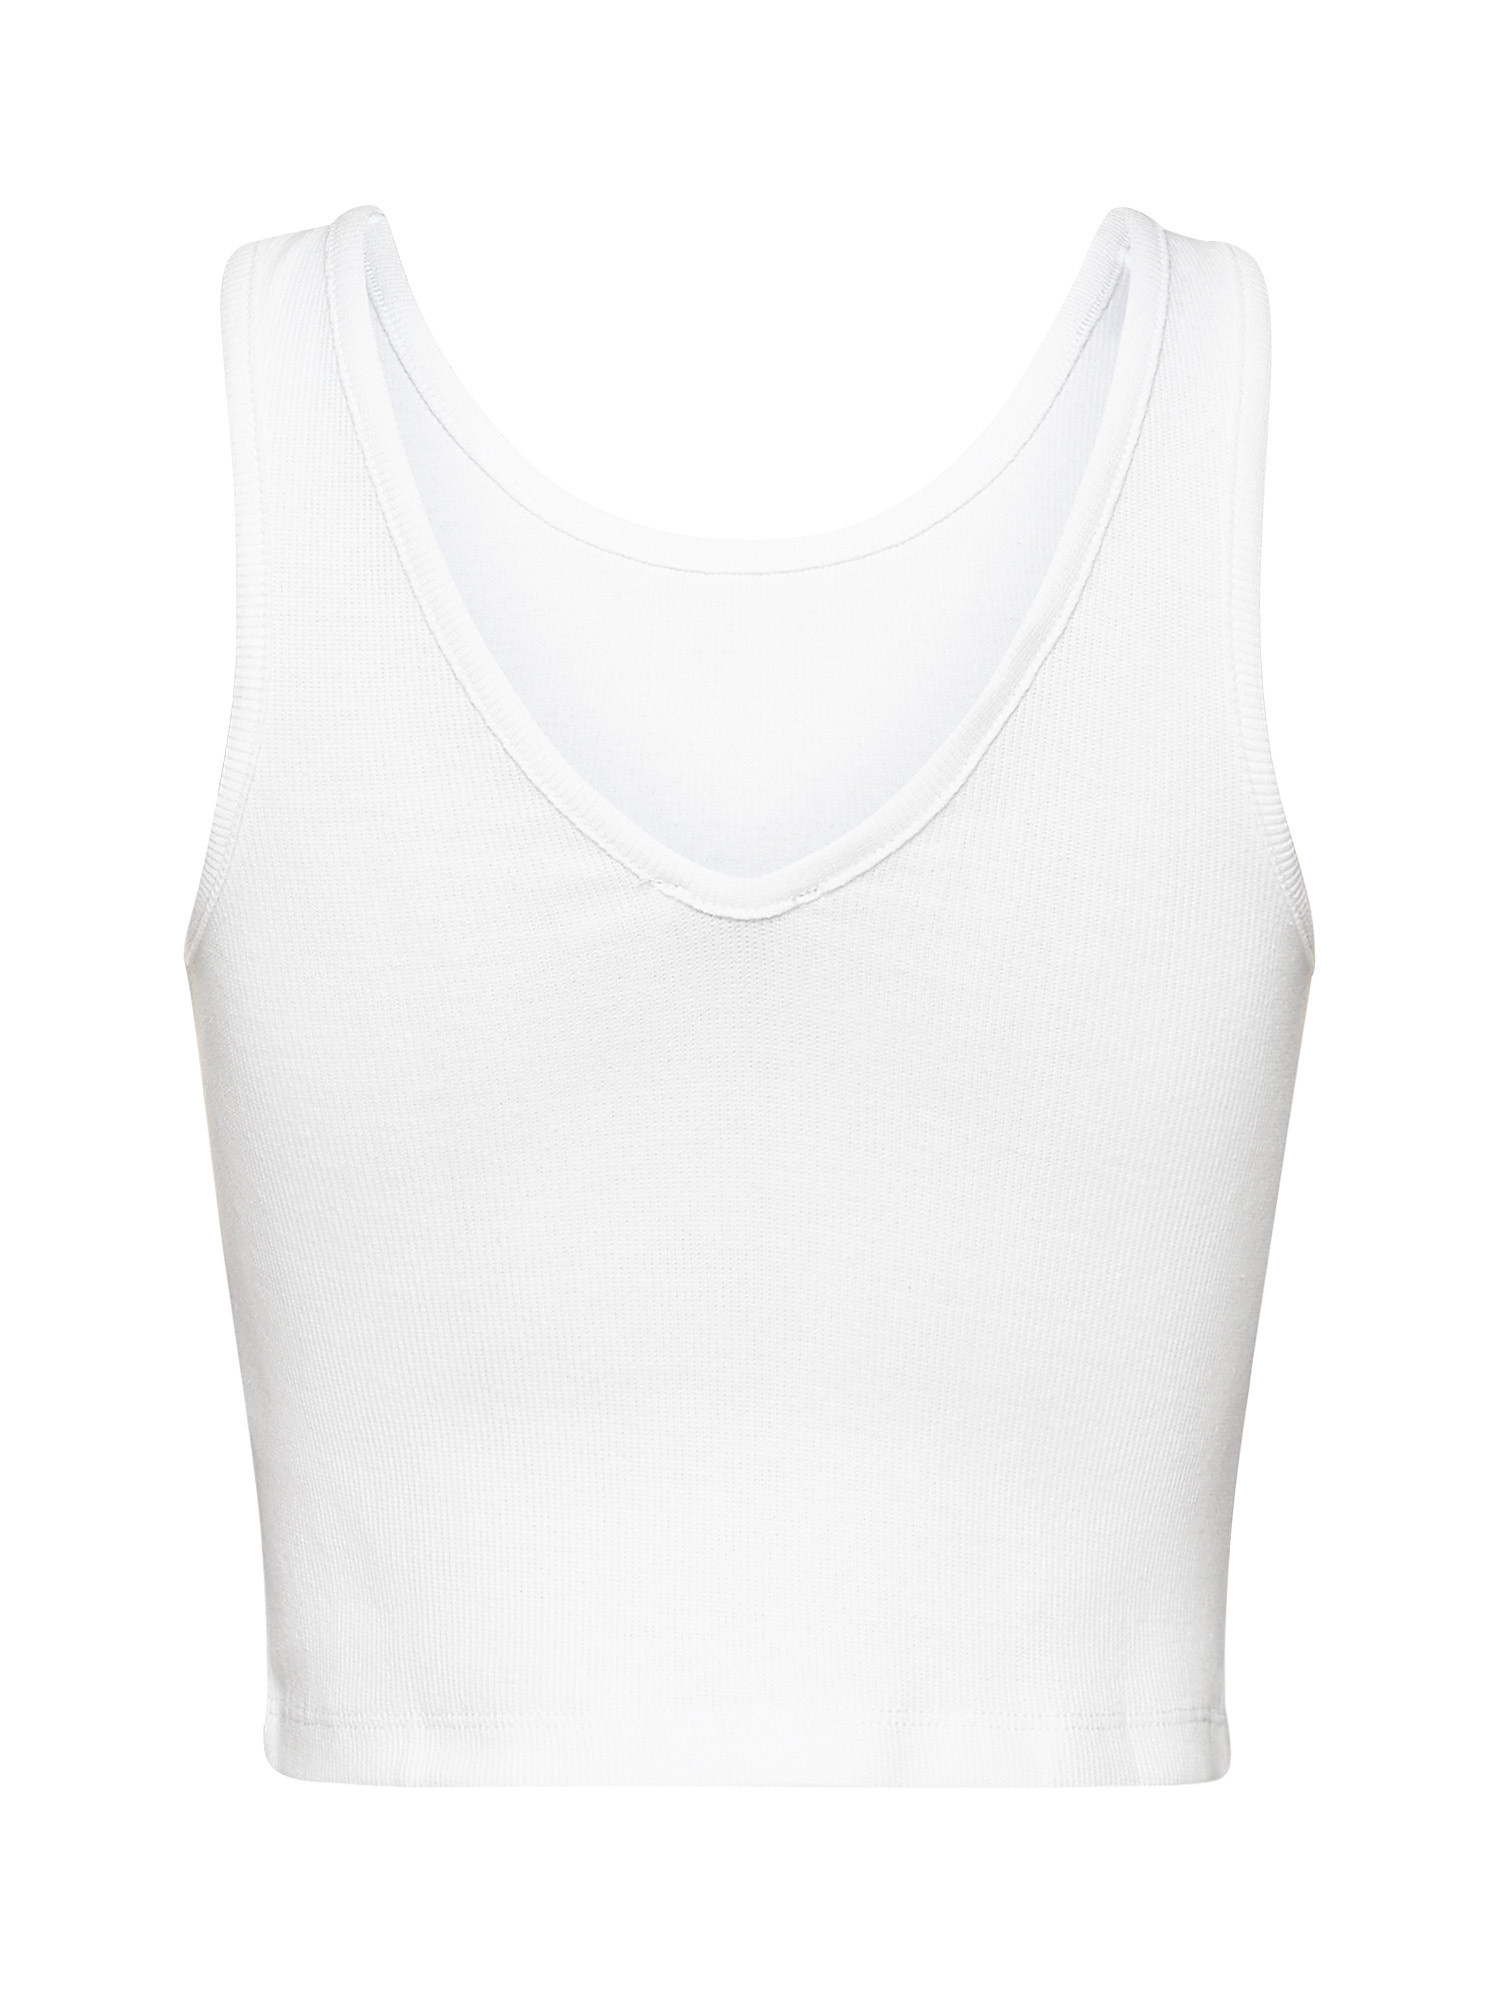 Pepe Jeans - Ribbed tank top, White, large image number 1